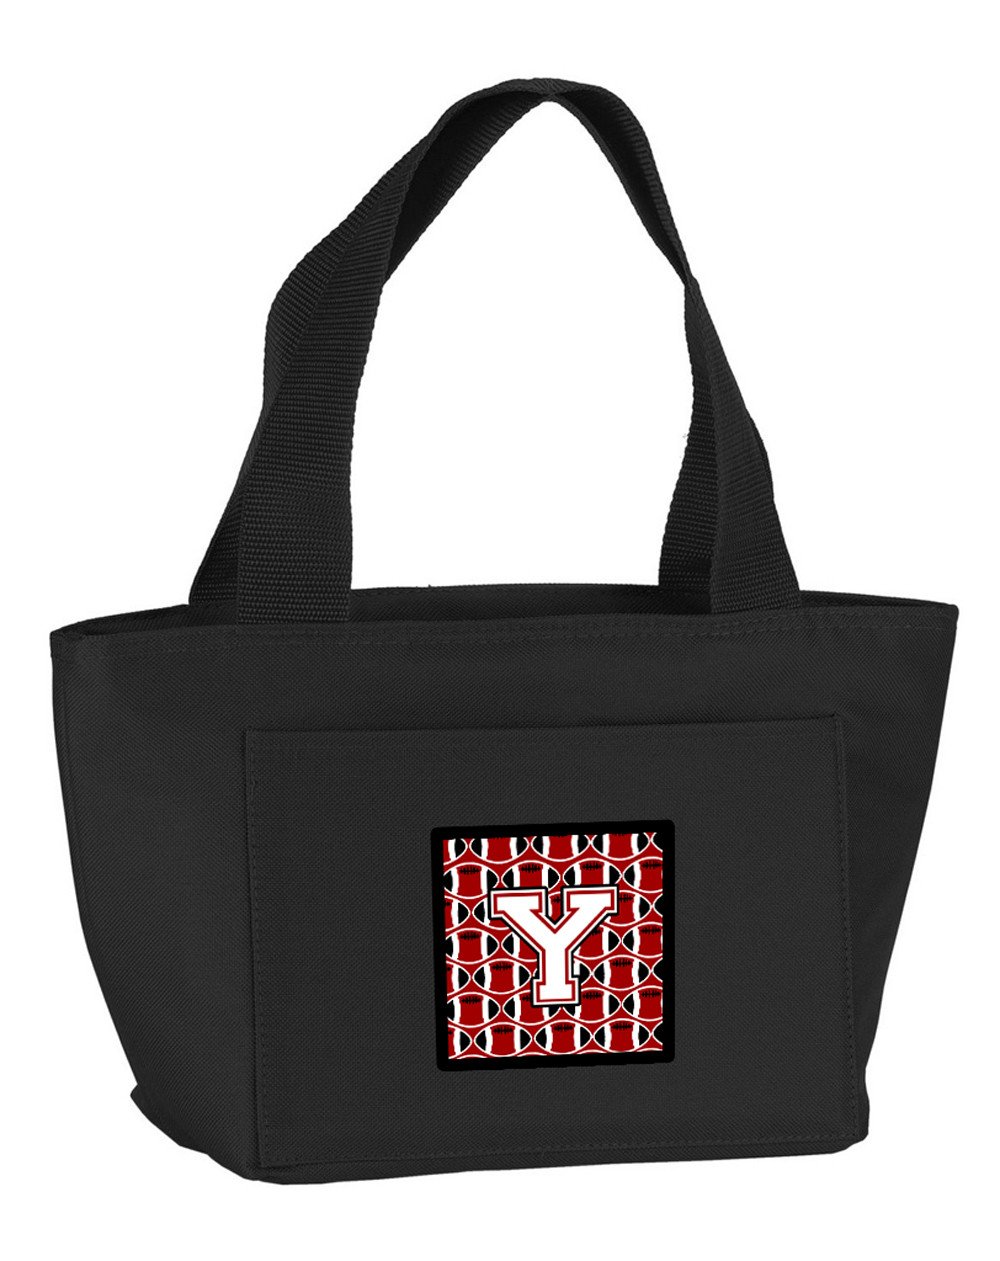 Letter Y Football Cardinal and White Lunch Bag CJ1082-YBK-8808 by Caroline's Treasures